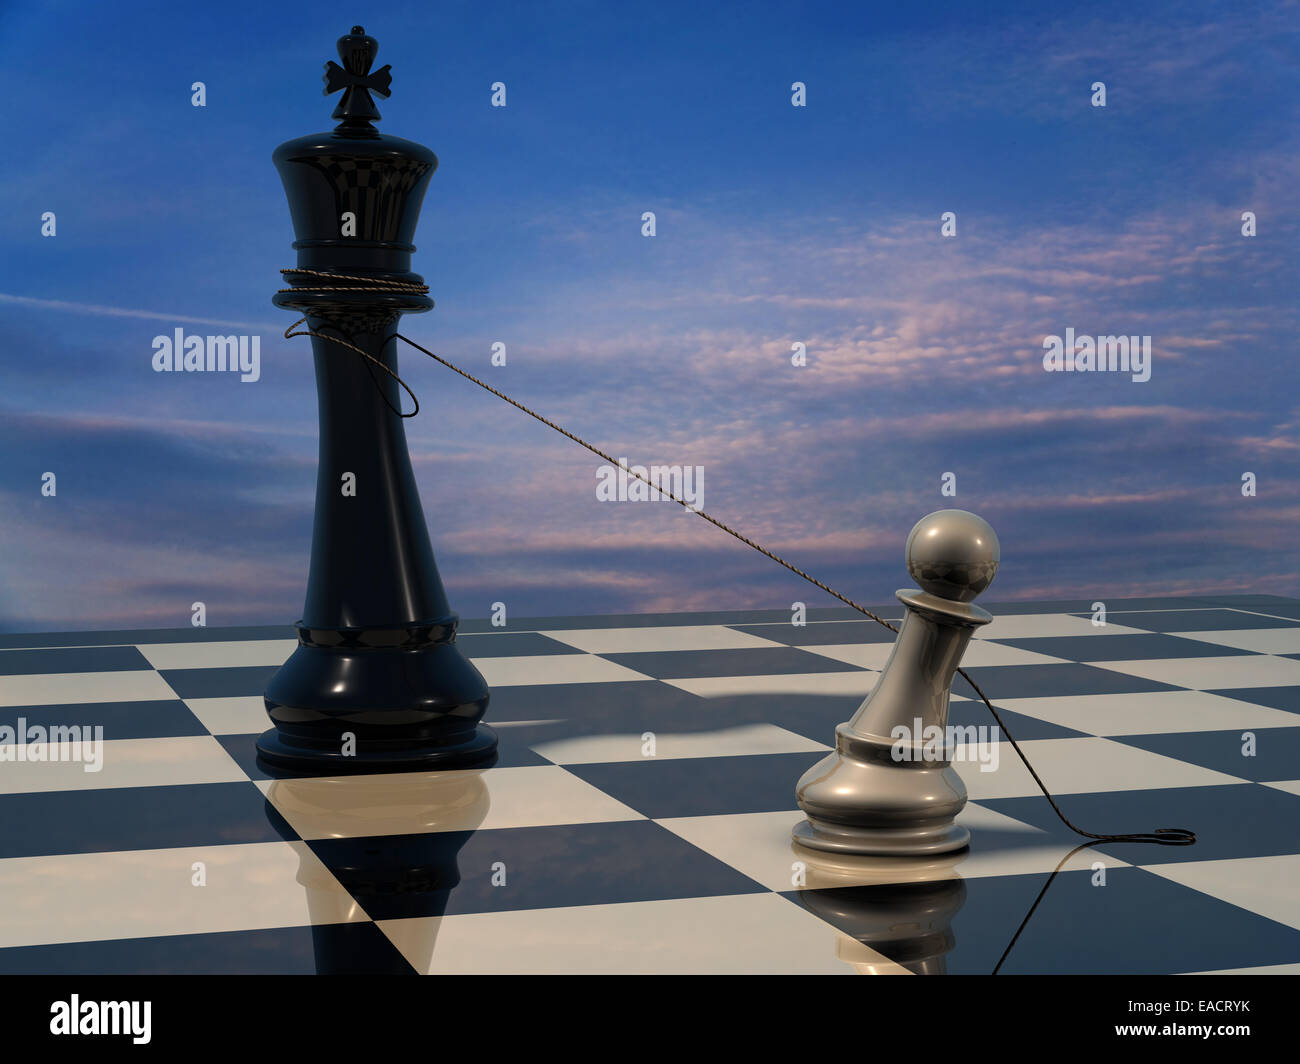 Chess King stock image. Image of business, action, board - 28490759